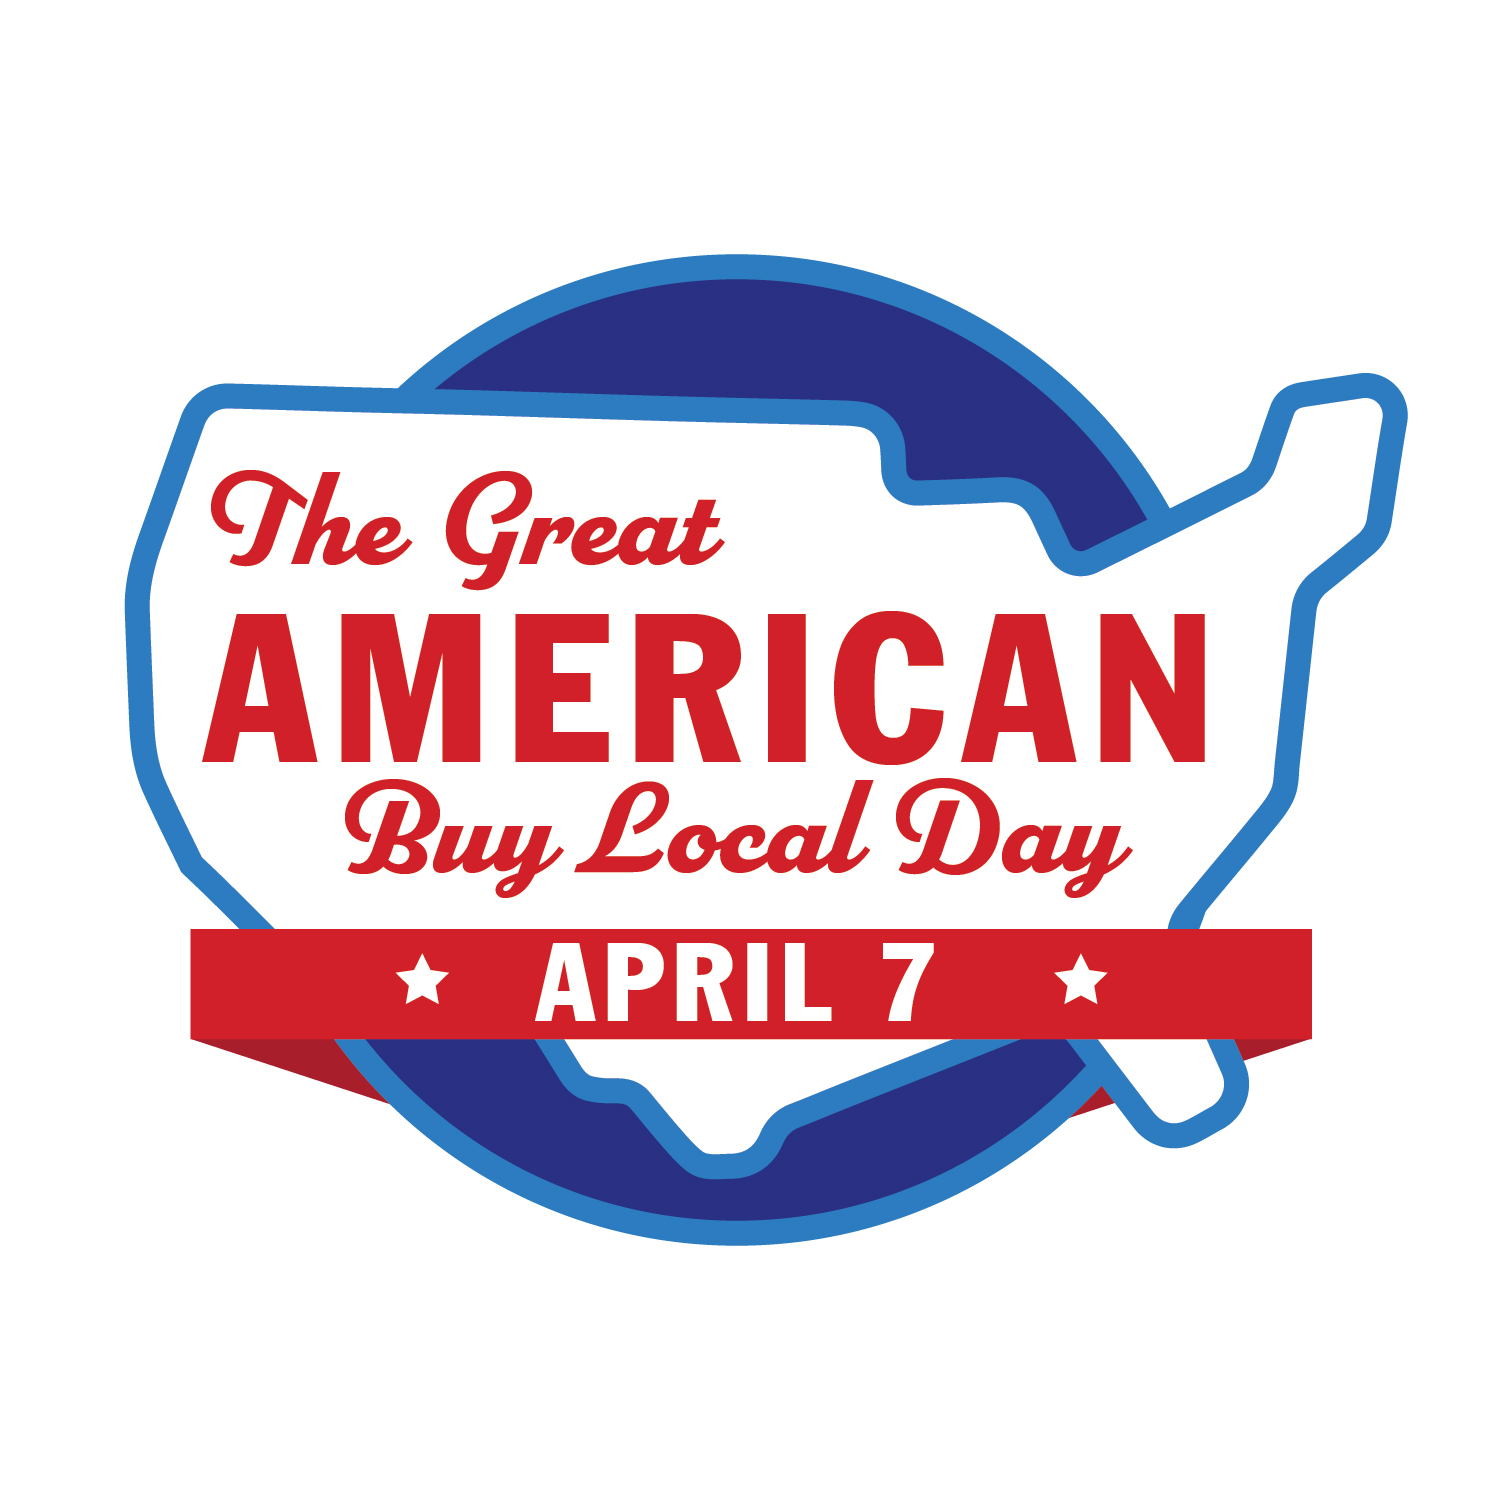 Image for The Great American Buy Local Day